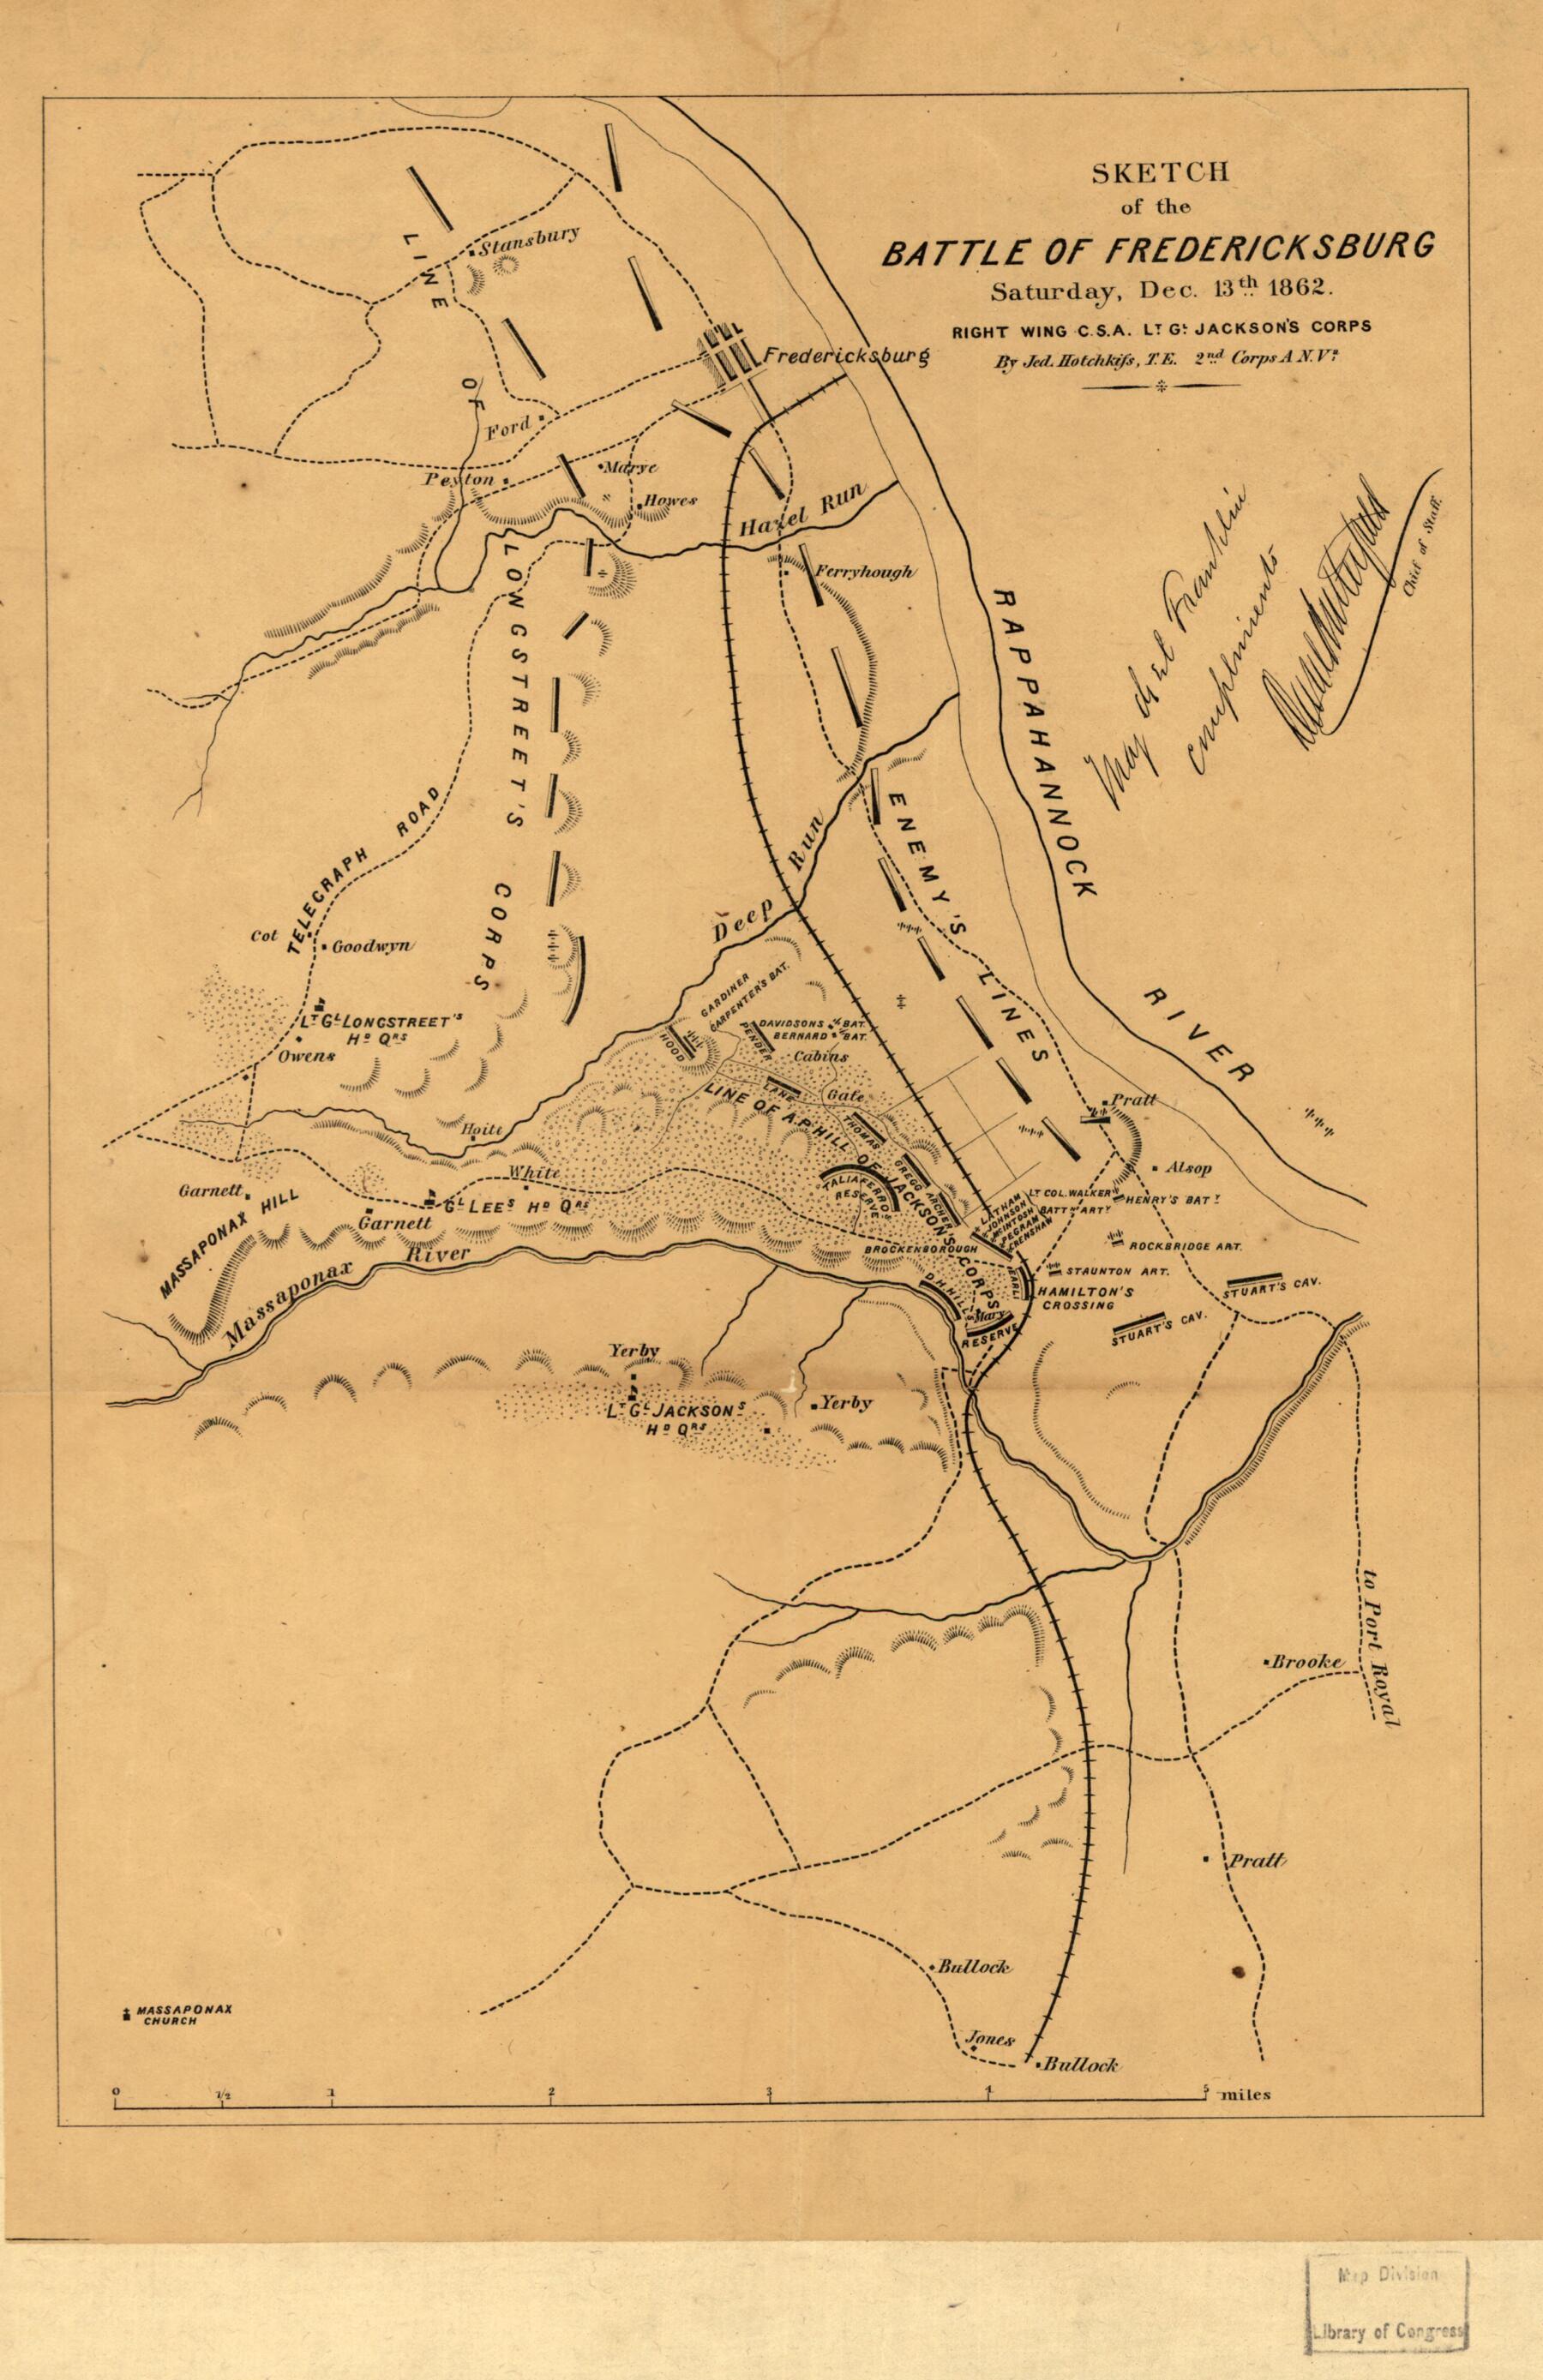 This old map of Sketch of the Battle of Fredericksburg, Saturday, Dec. 13th from 1862, Right Wing, C.S.A., Lt. Gl. Jackson&